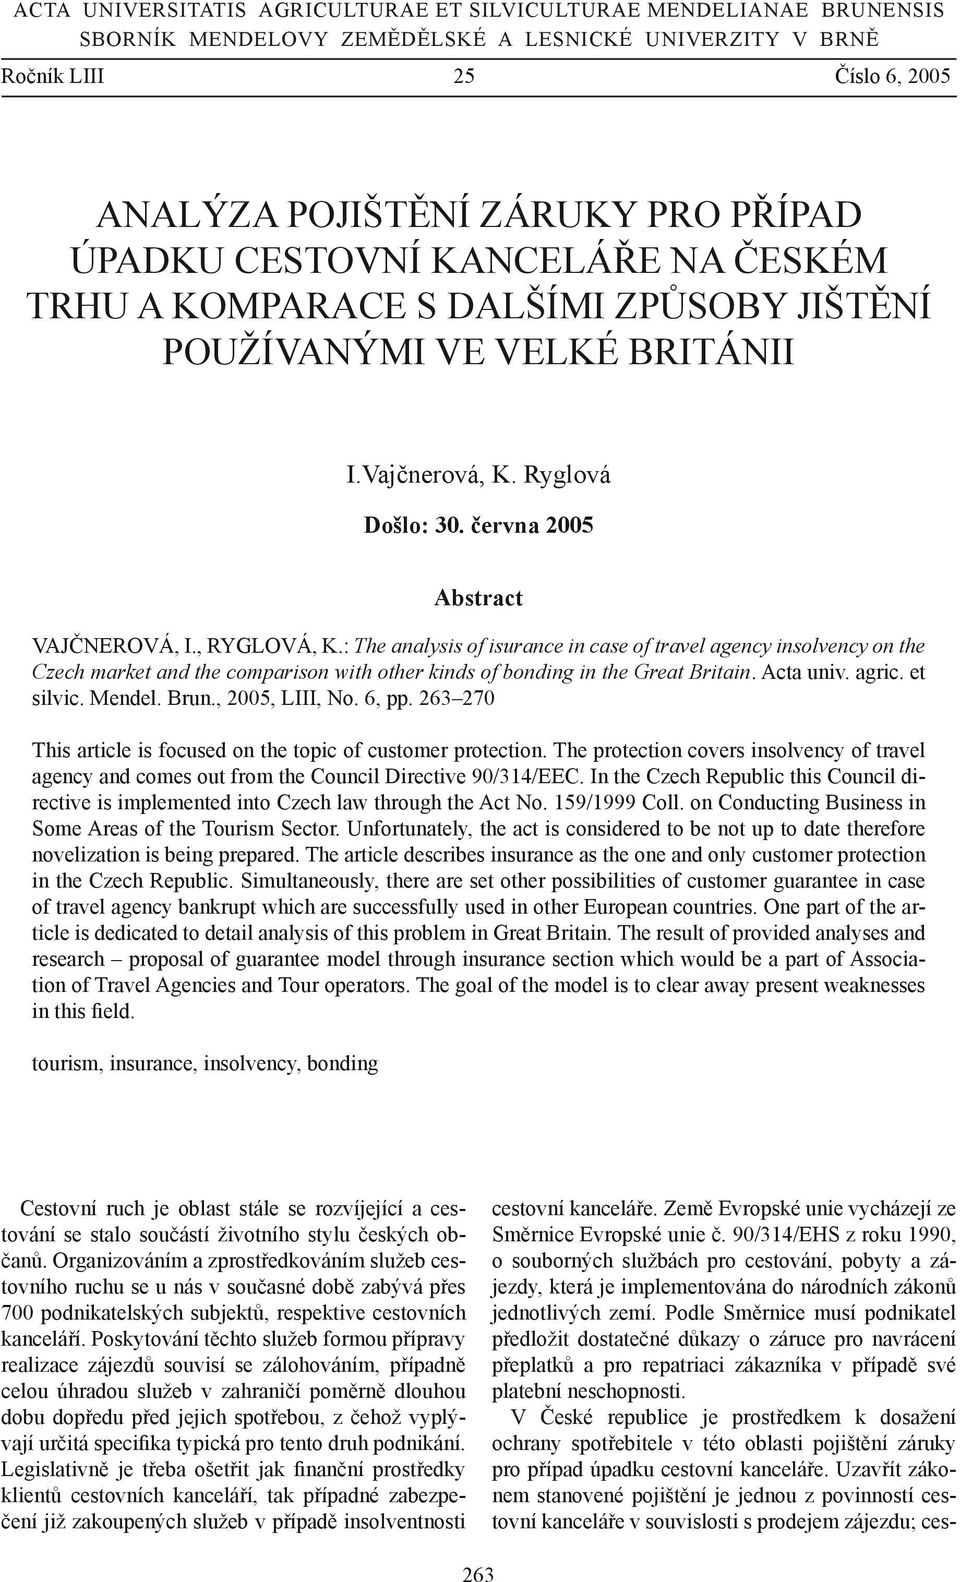 : The analysis of isurance in case of travel agency insolvency on the Czech market and the comparison with other kinds of bonding in the Great Britain. Acta univ. agric. et silvic. Mendel. Brun.